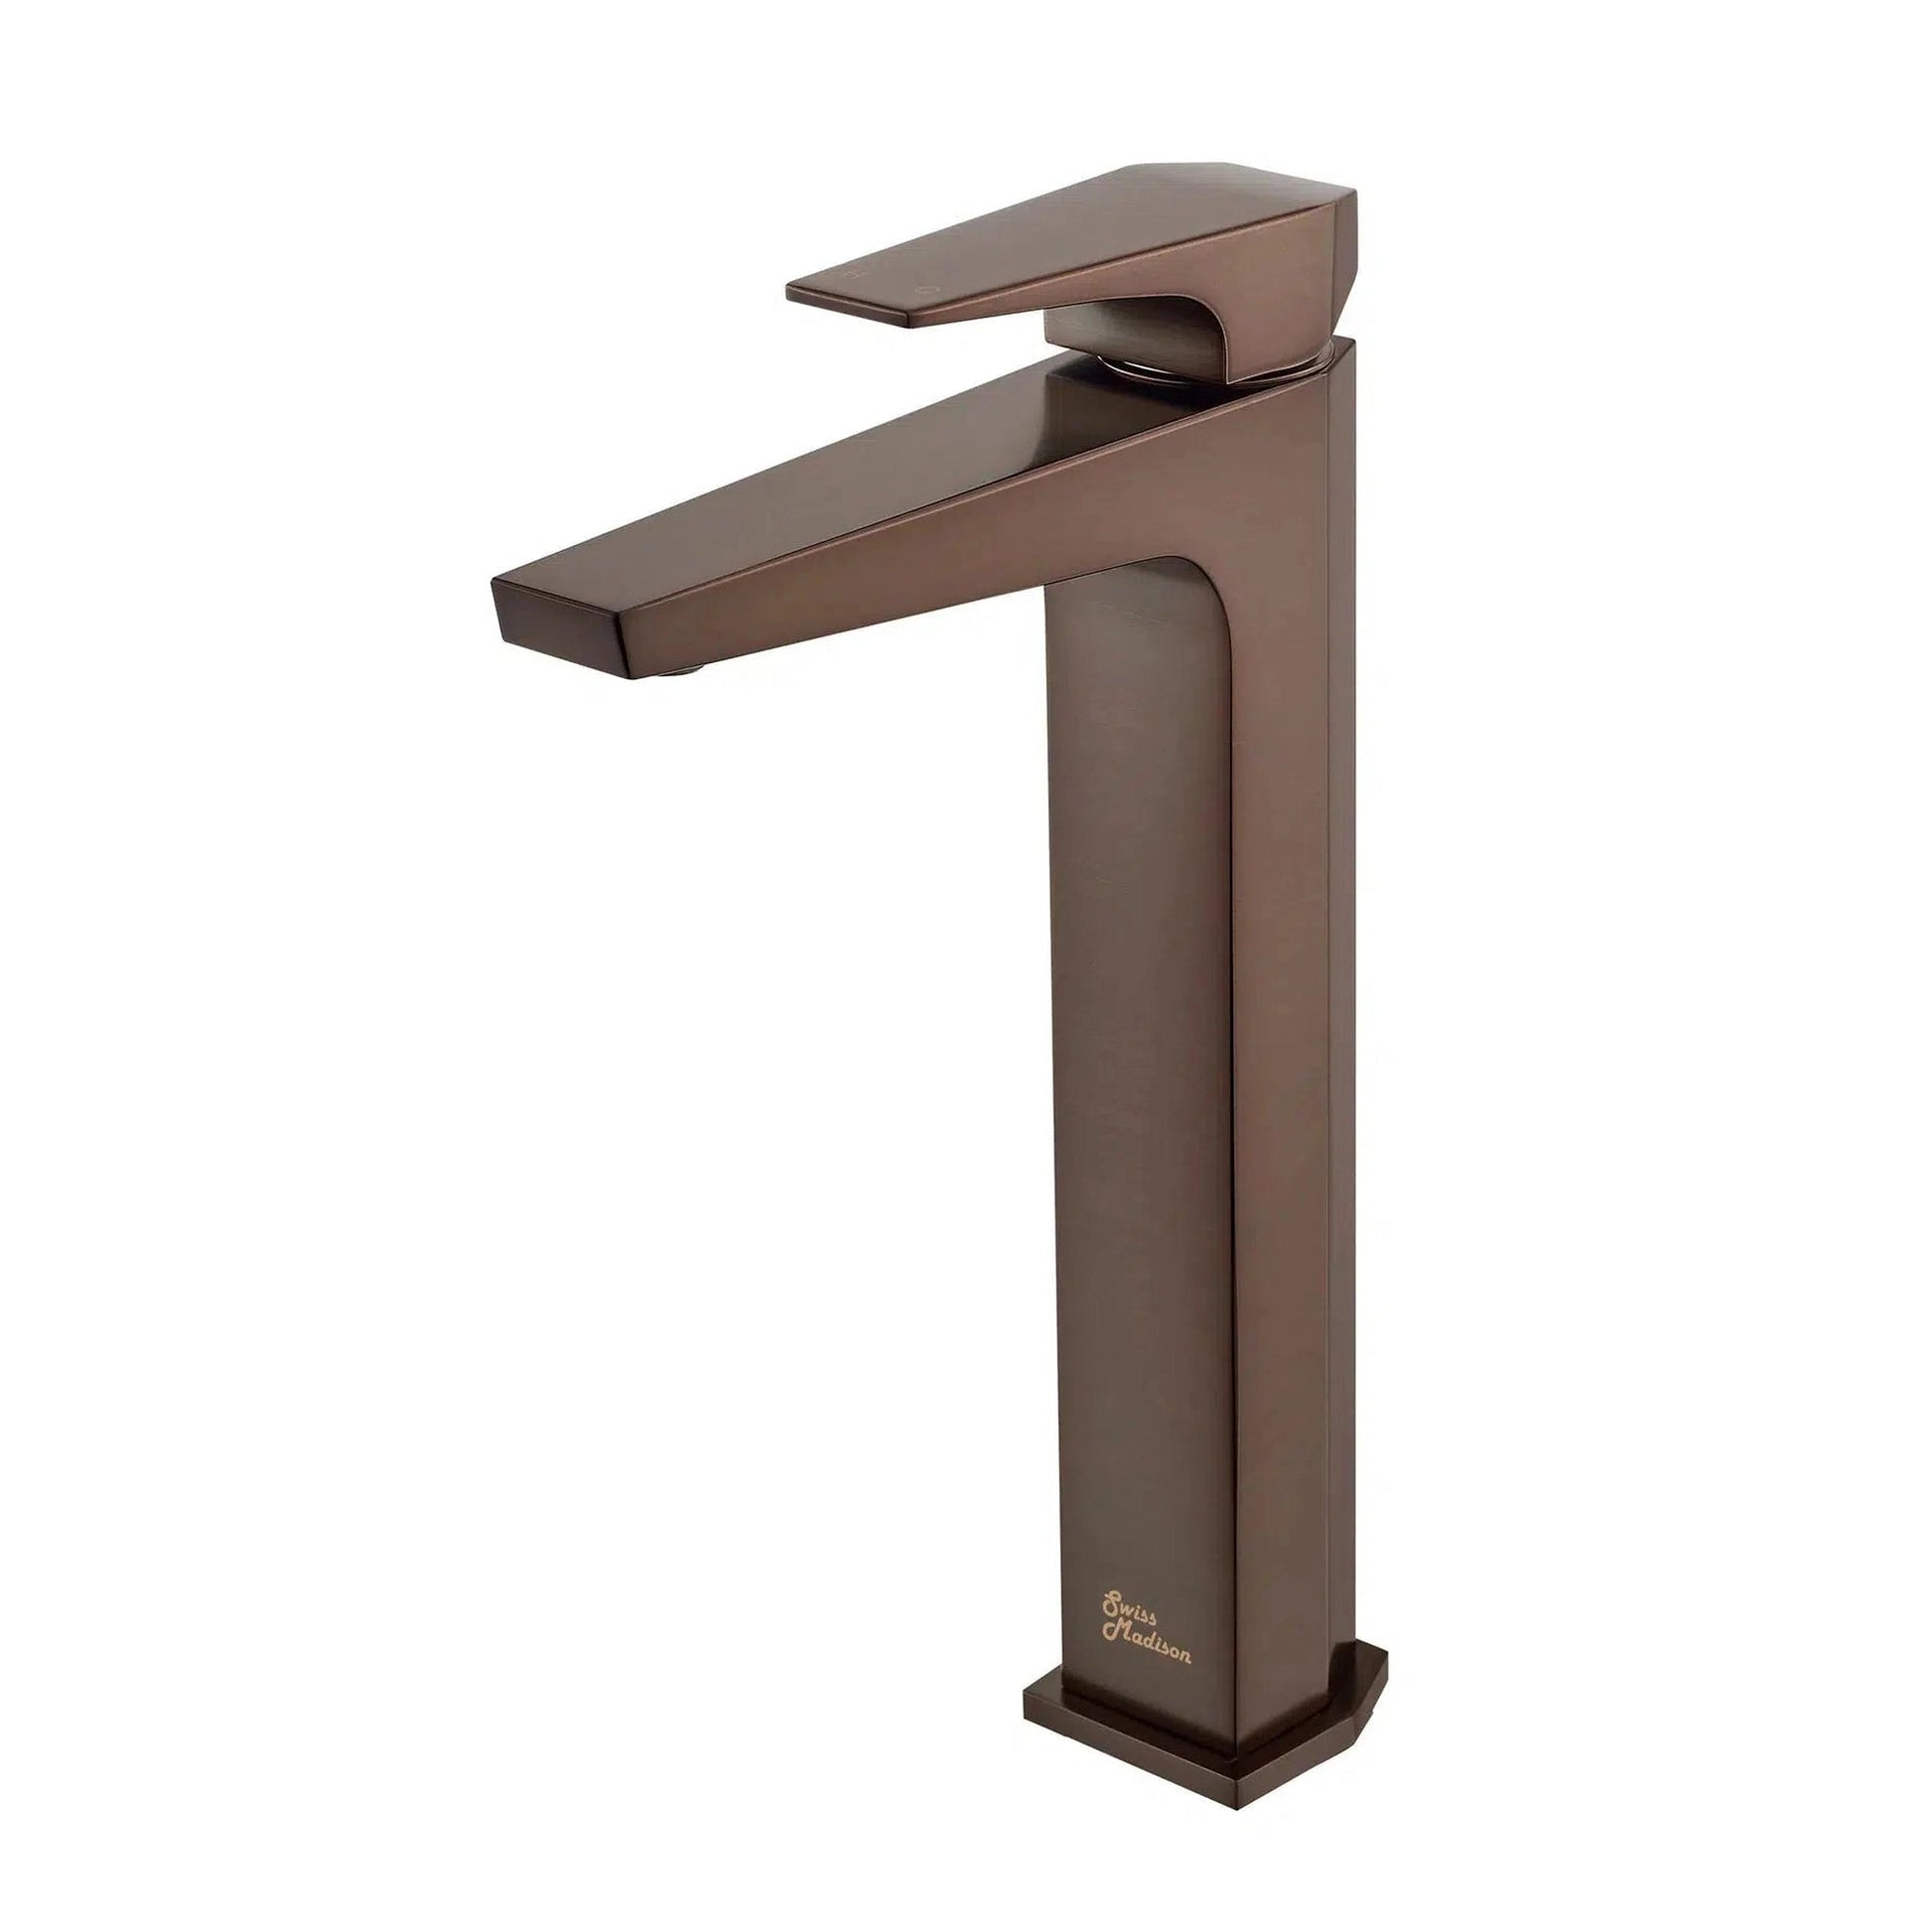 Swiss Madison Voltaire 11" Oil Rubbed Bronze Single Hole Bathroom Faucet With Flow Rate of 1.5 GPM